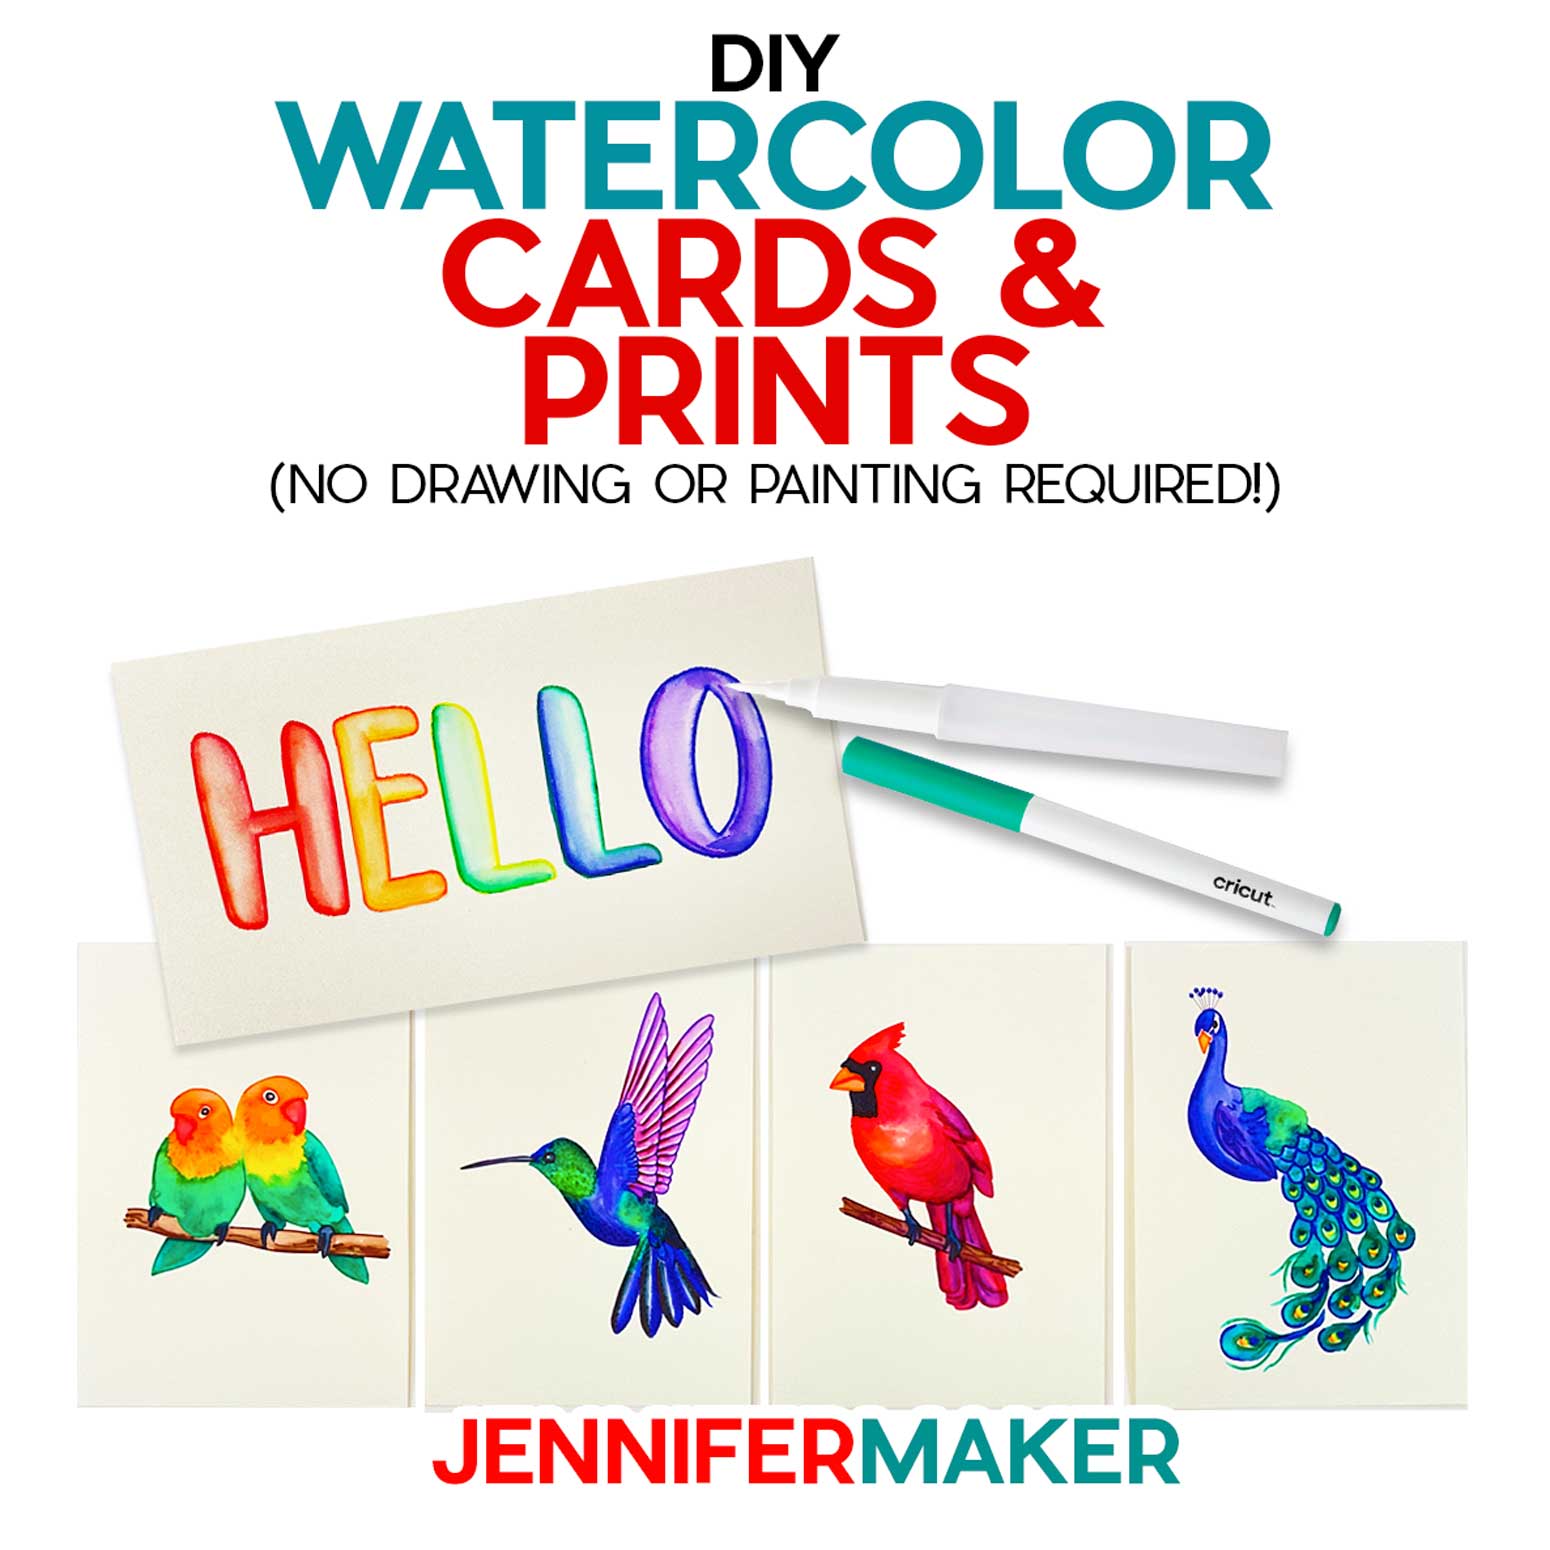 DIY Watercolor Cards featuring birds painted with Cricut watercolor markers for cards and prints with free designs by JenniferMaker